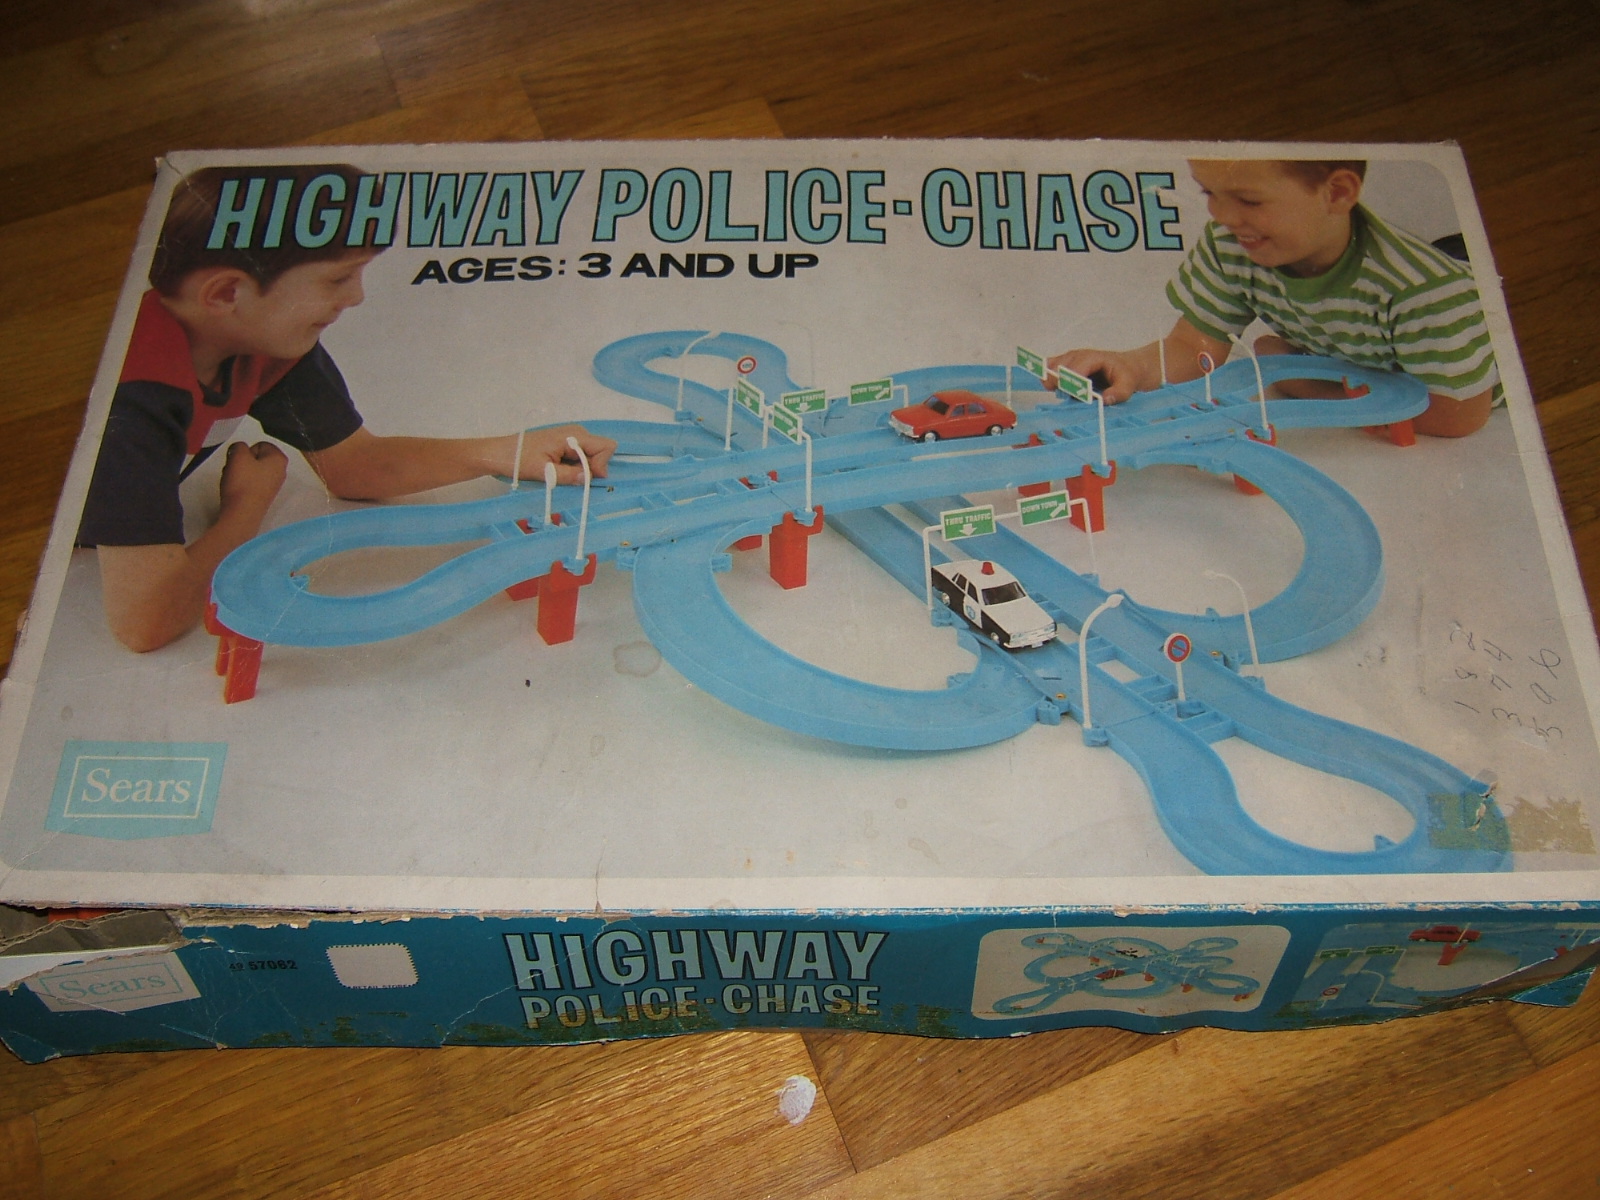 sears_highway_police_chase